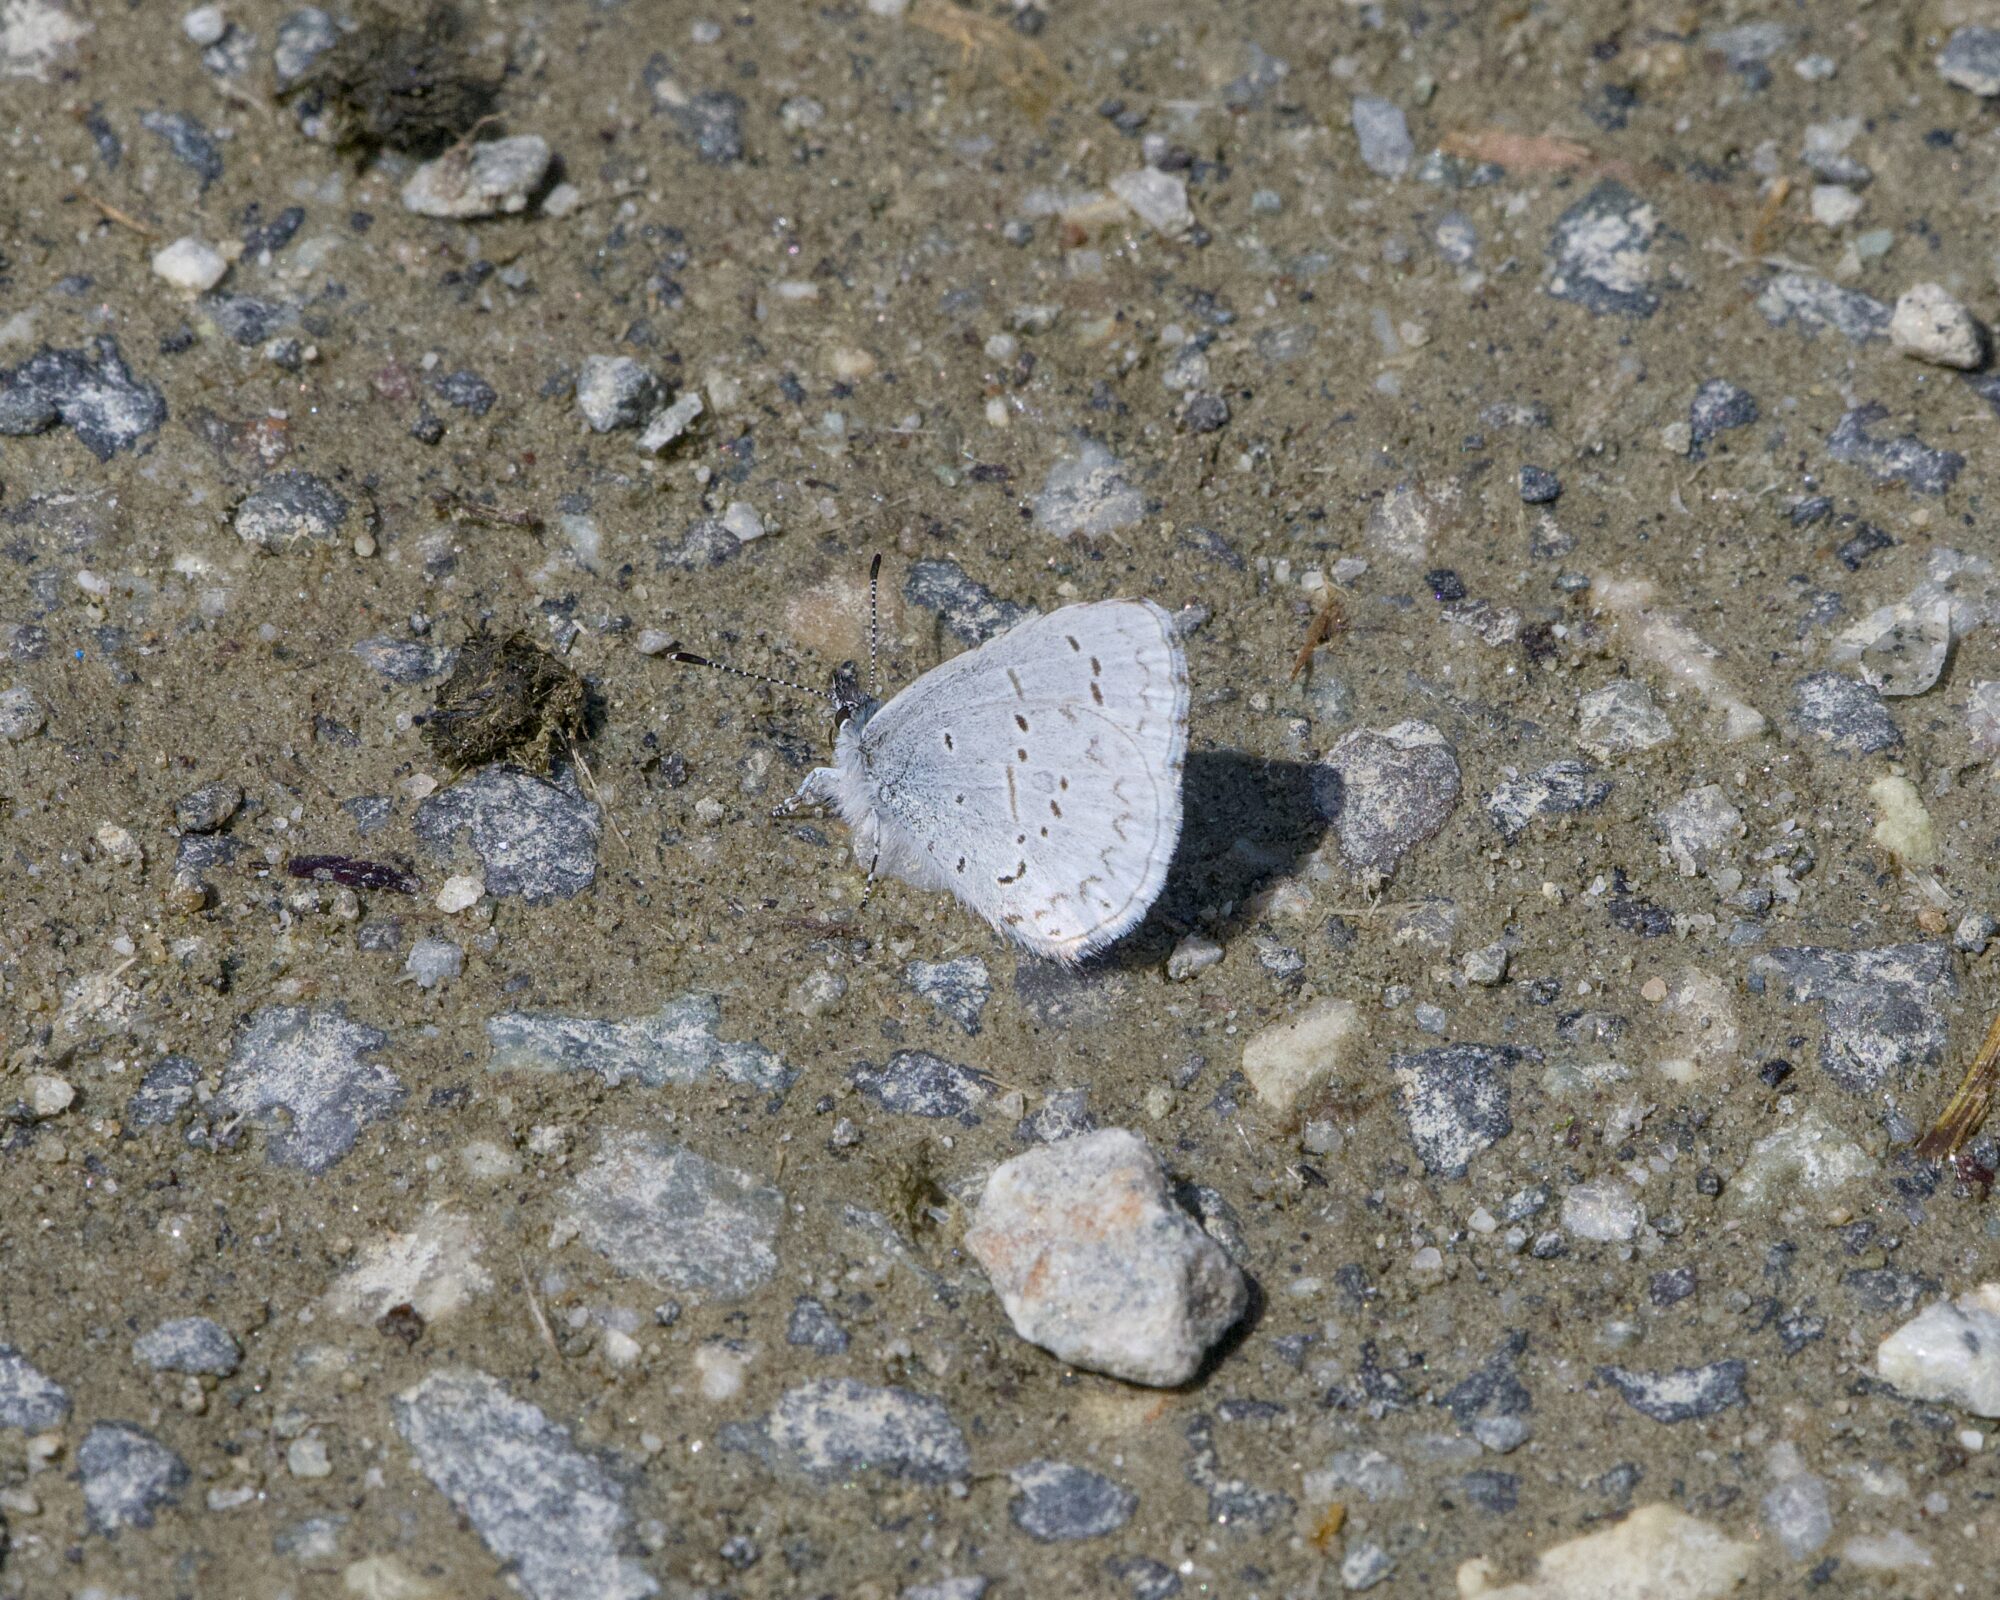 An echo azure -- a very small light dusty blue butterfly with light grey dots -- is resting on the ground